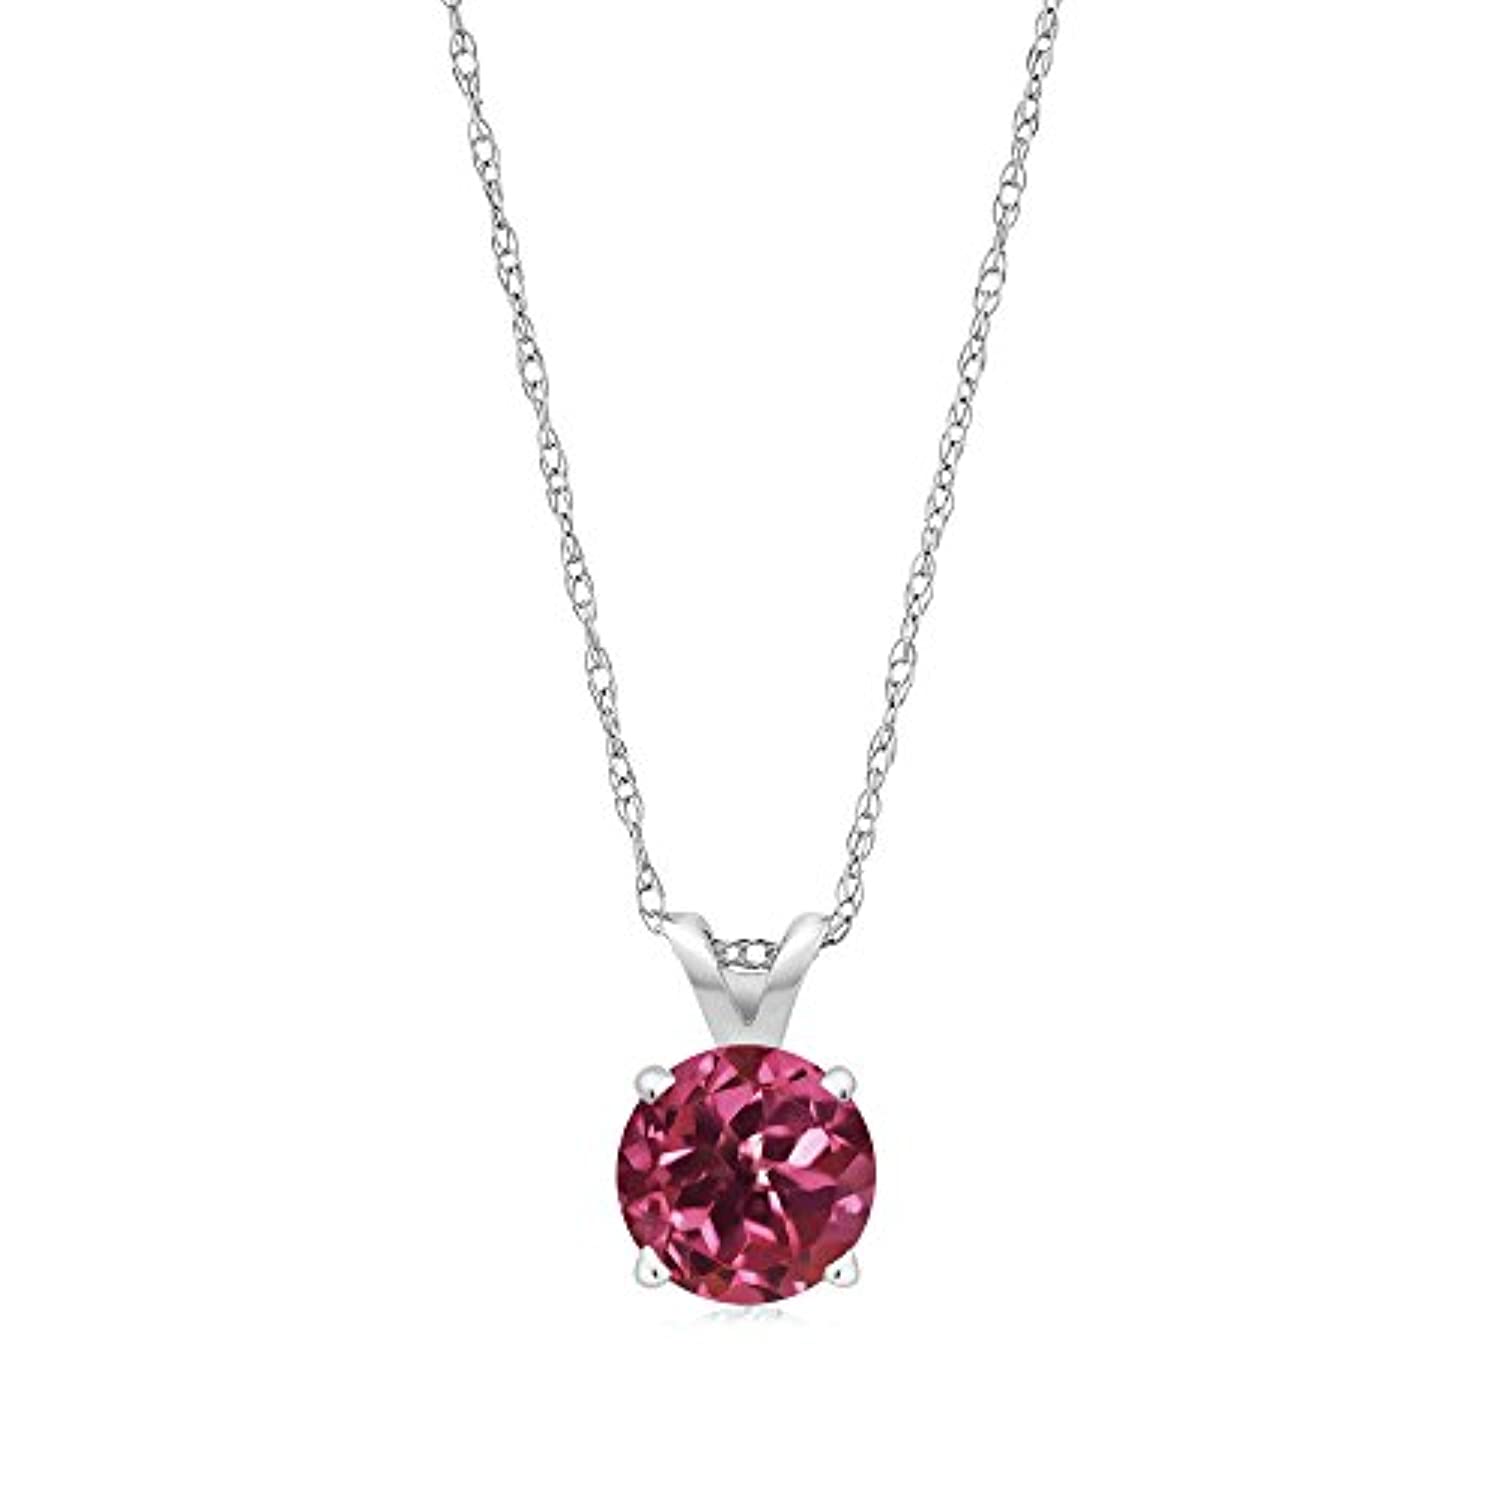 14K Gold Pink Tourmaline Pendant Necklace  with 18 Inch 14k Chain